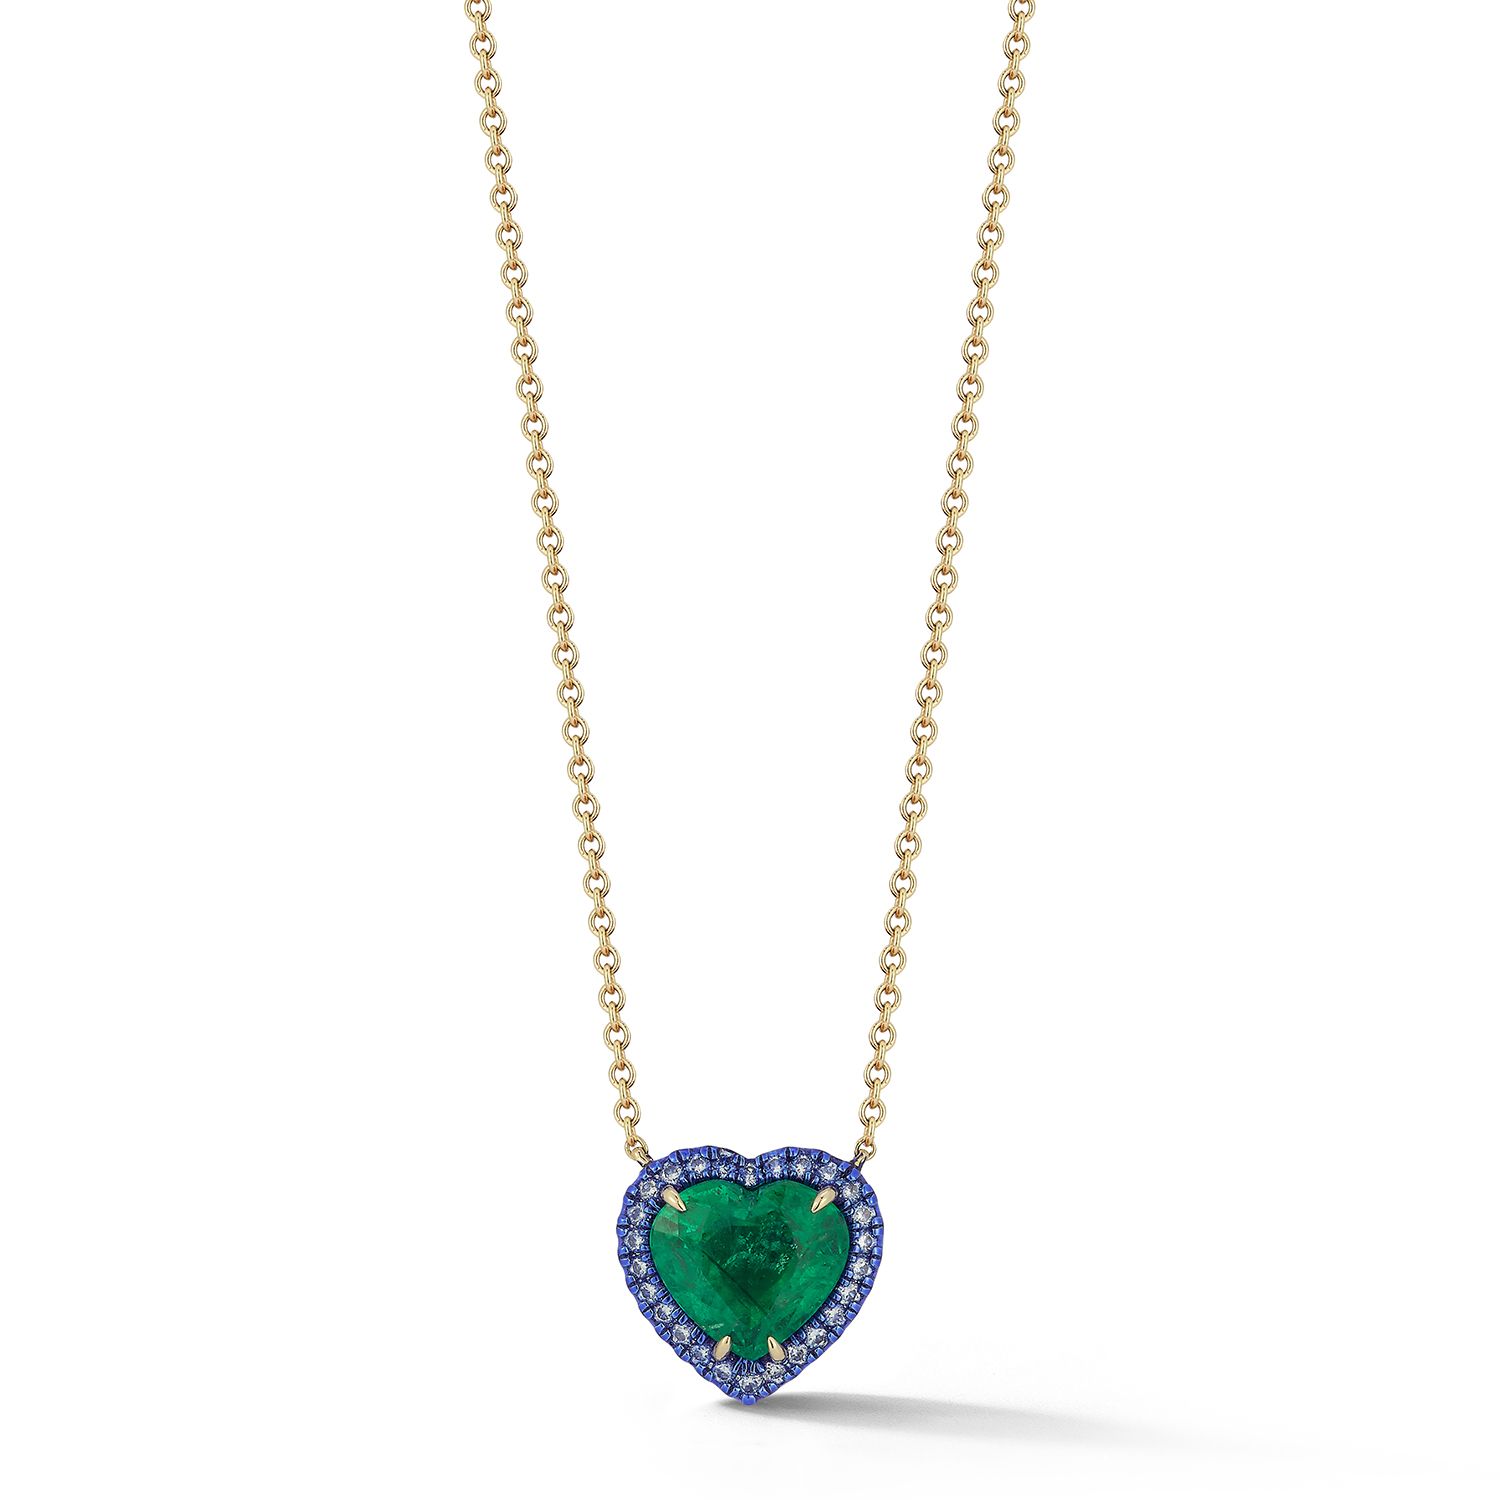 The Best Heart Shape Jewellery for Valentine's Day